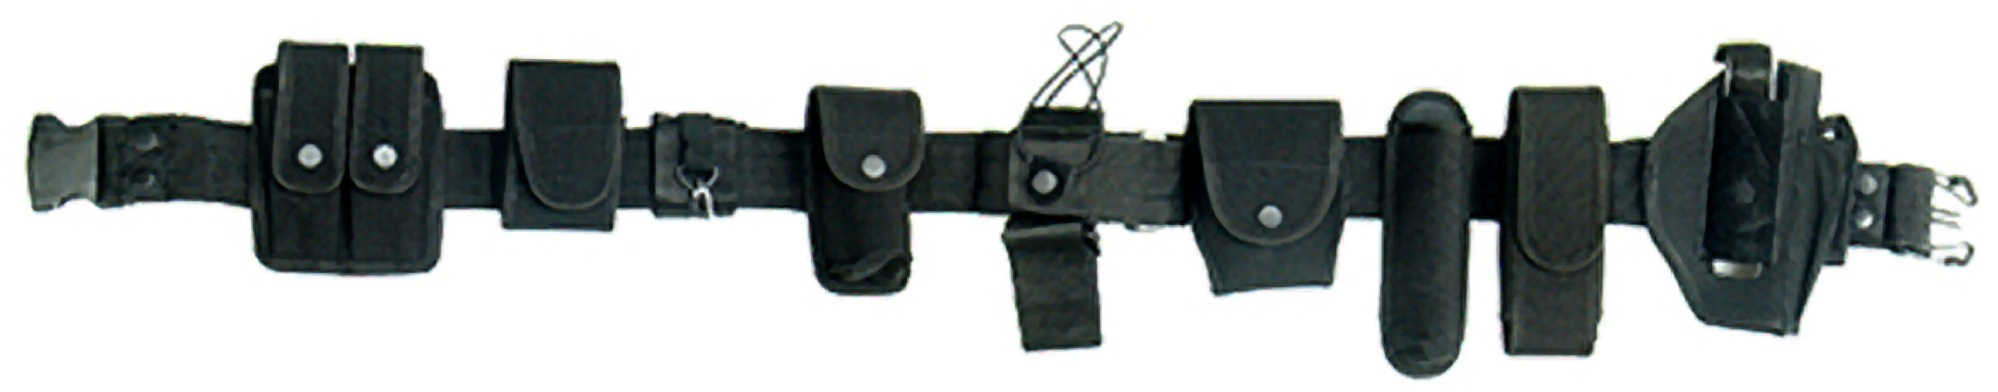 Leapers UTG Law Enforcement and Security Belt System-Black